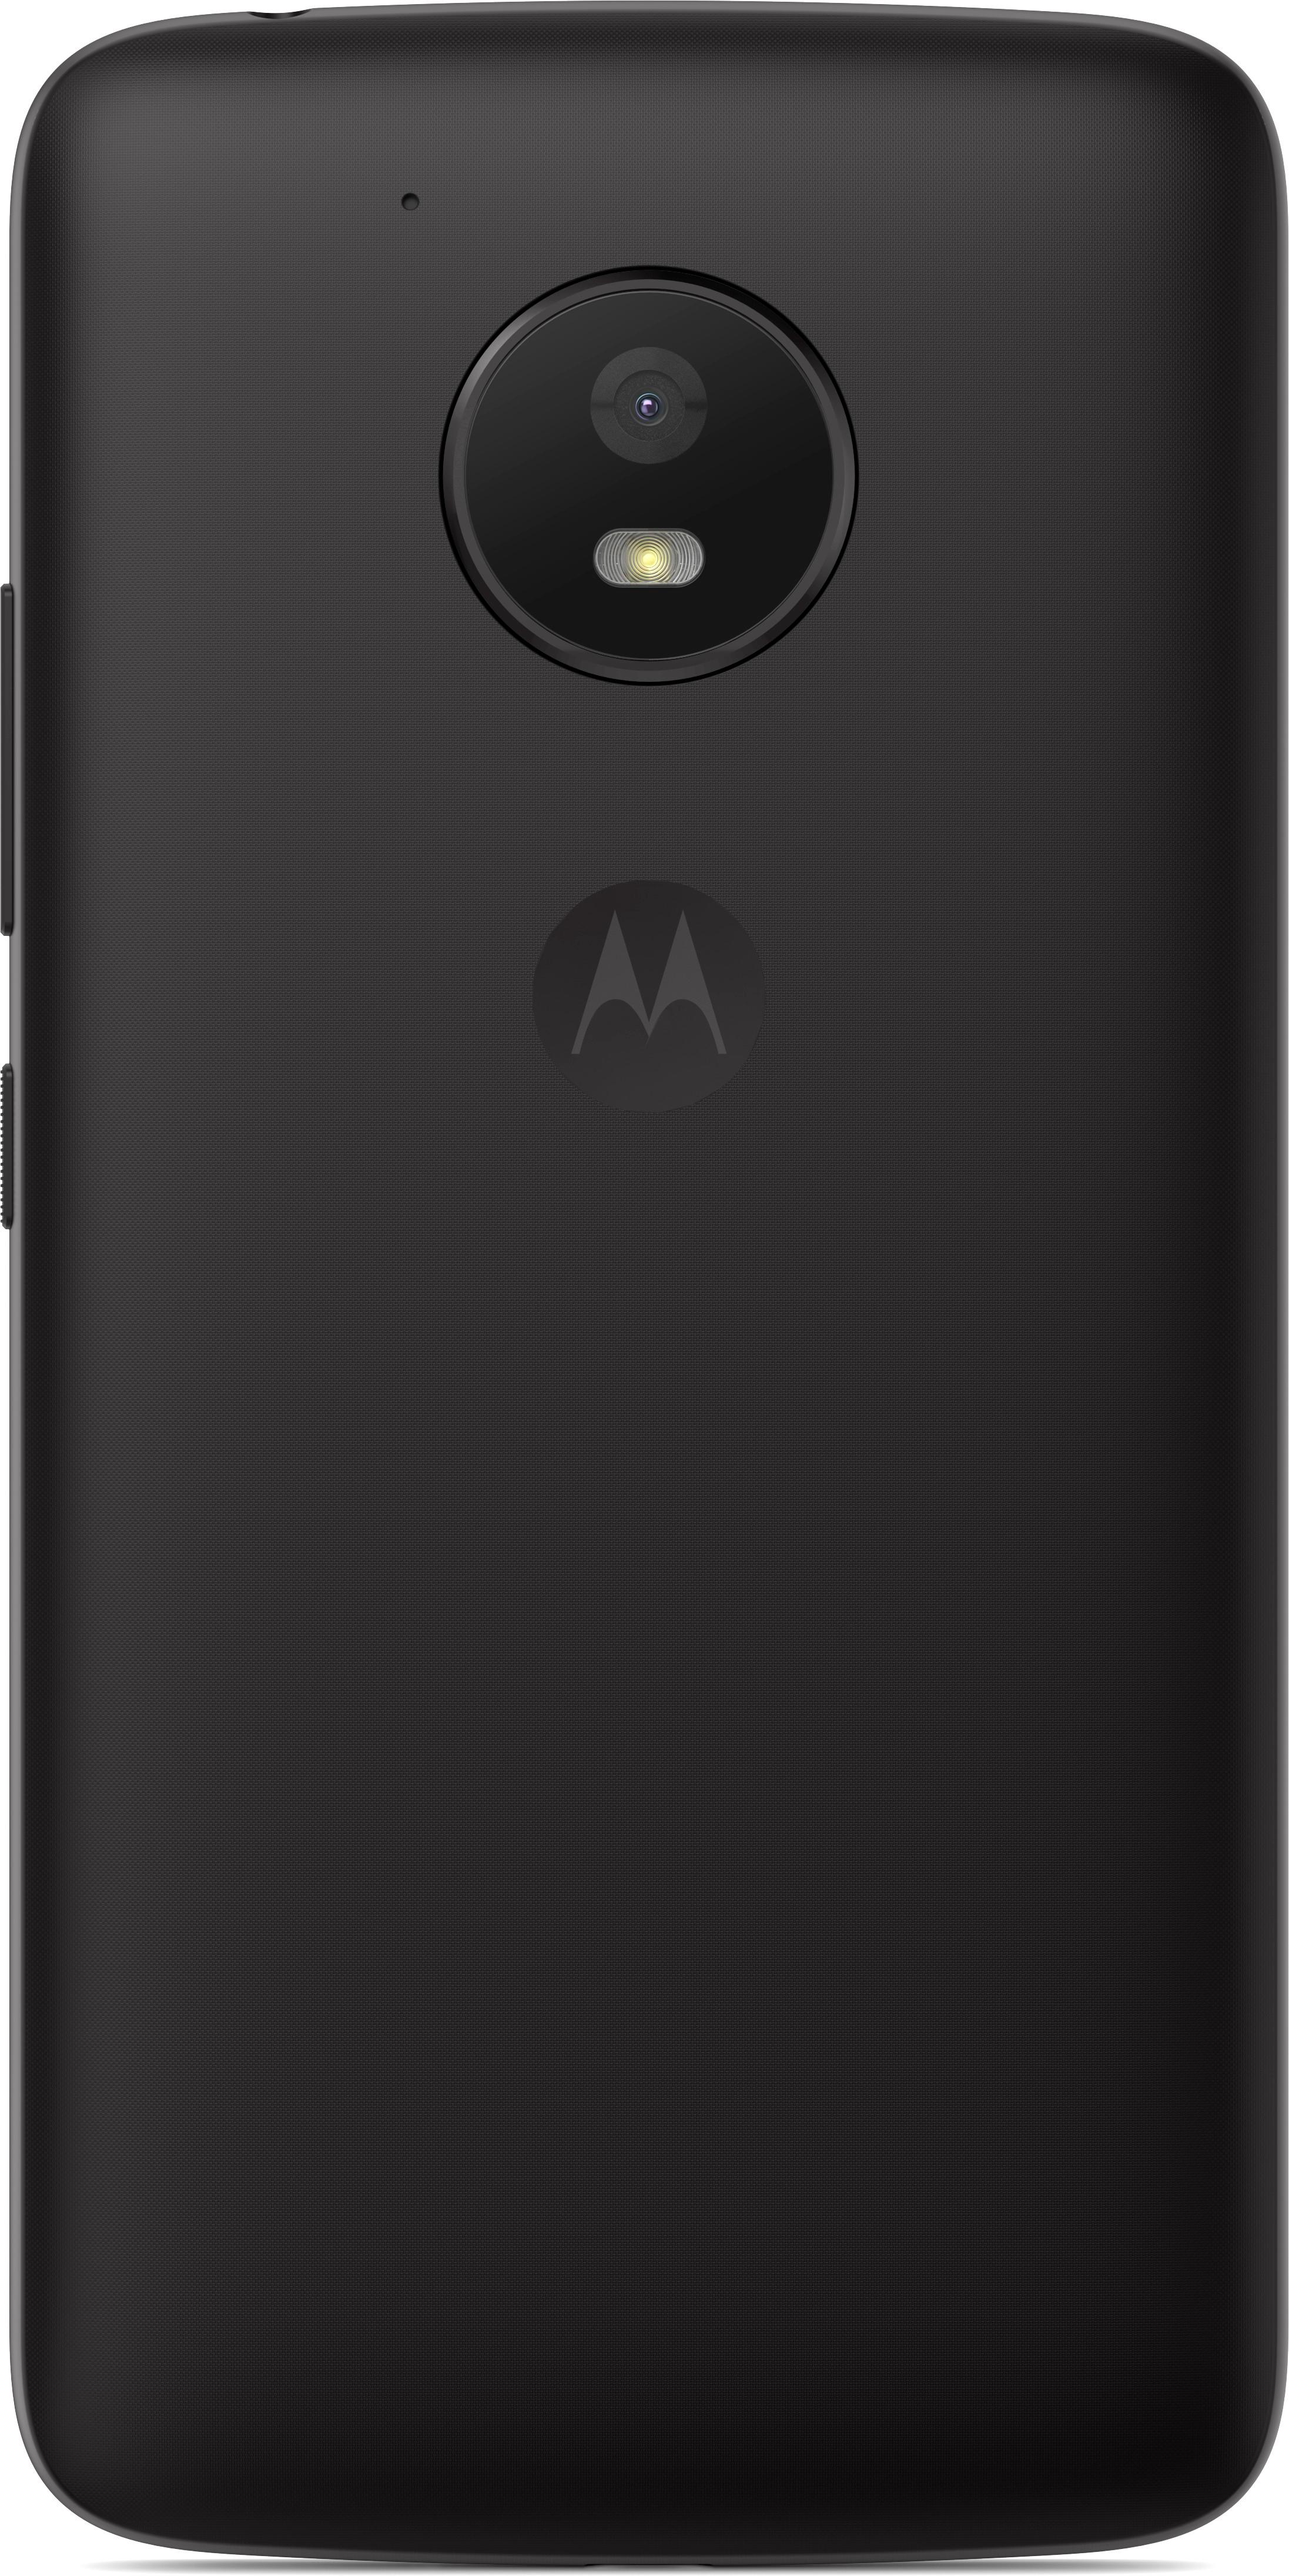 Questions and Answers: Motorola Moto E4 4G LTE with 16GB Memory Cell ...